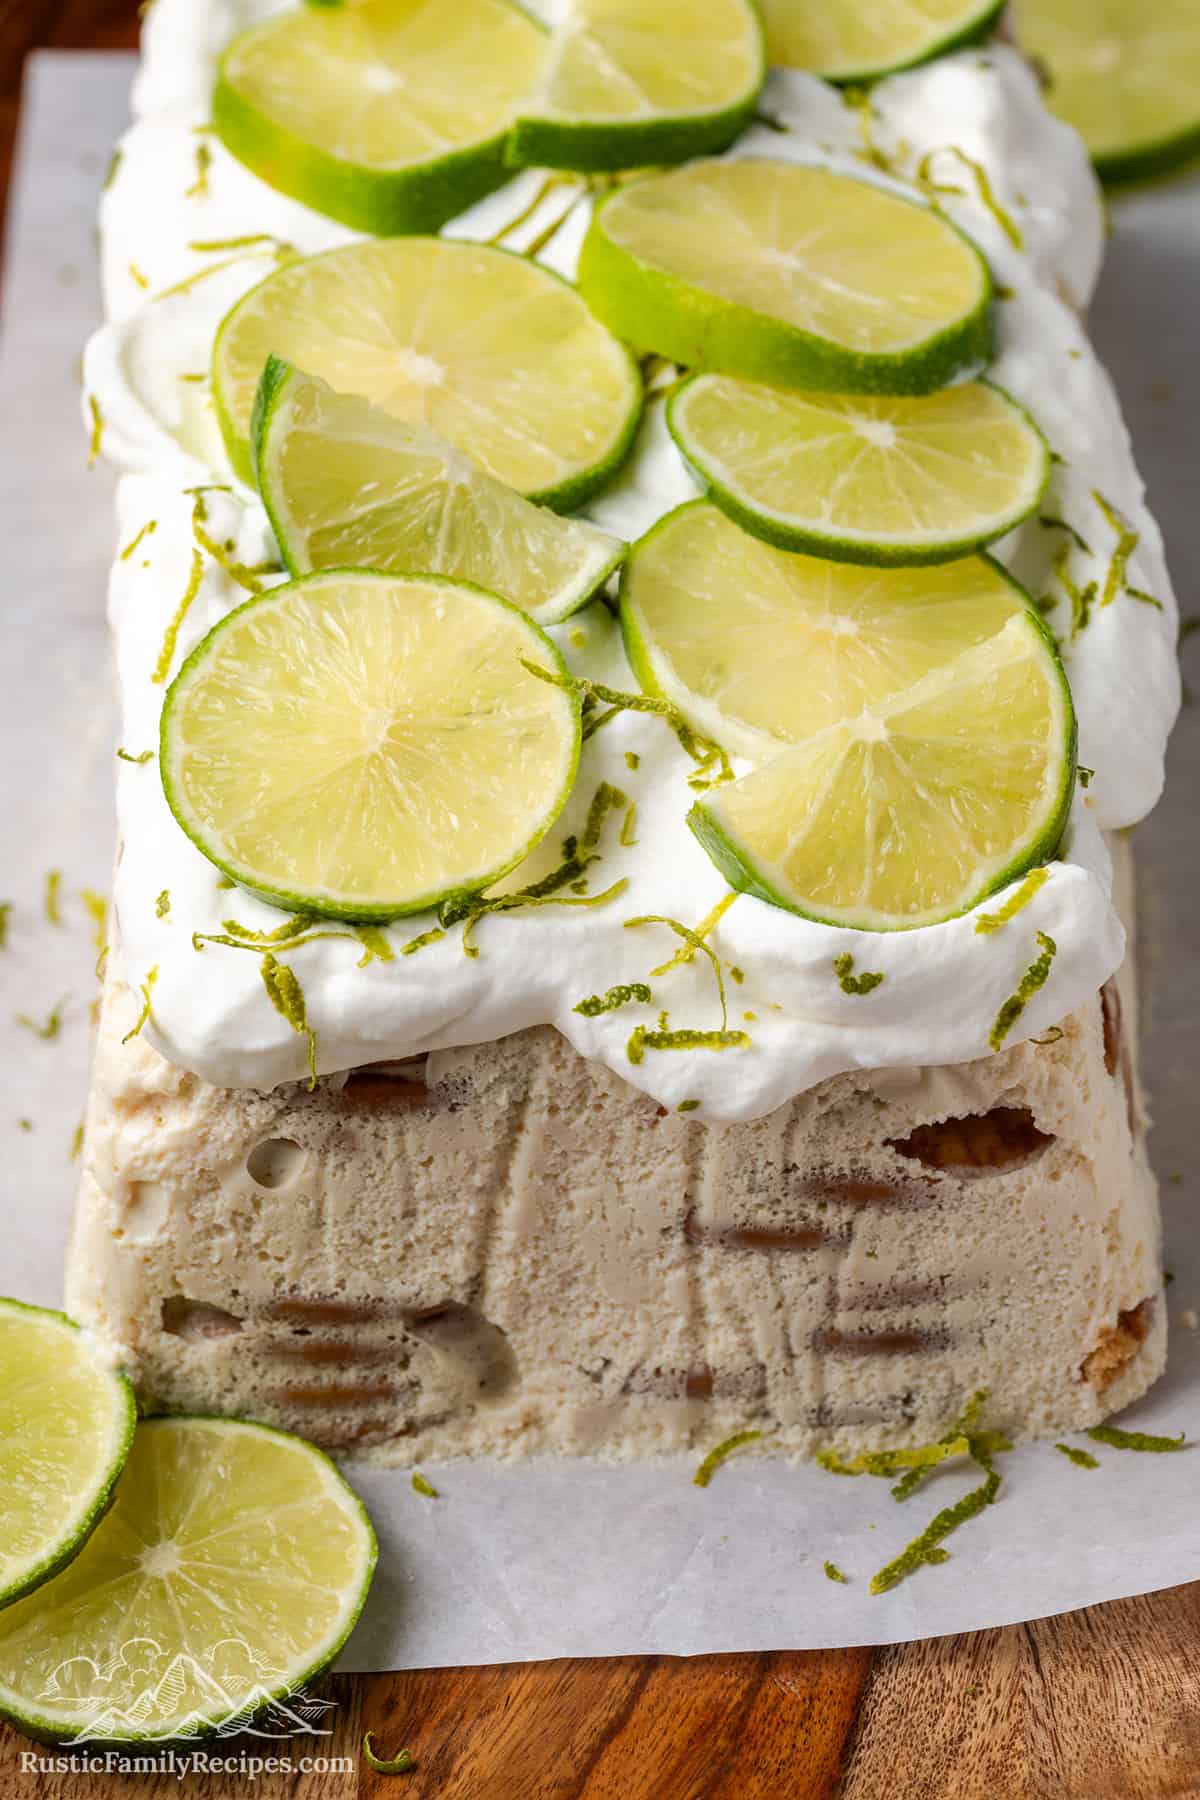 Close up of a carlota de limon icebox cake on a cutting board, topped with whipped cream and thinly sliced limes.